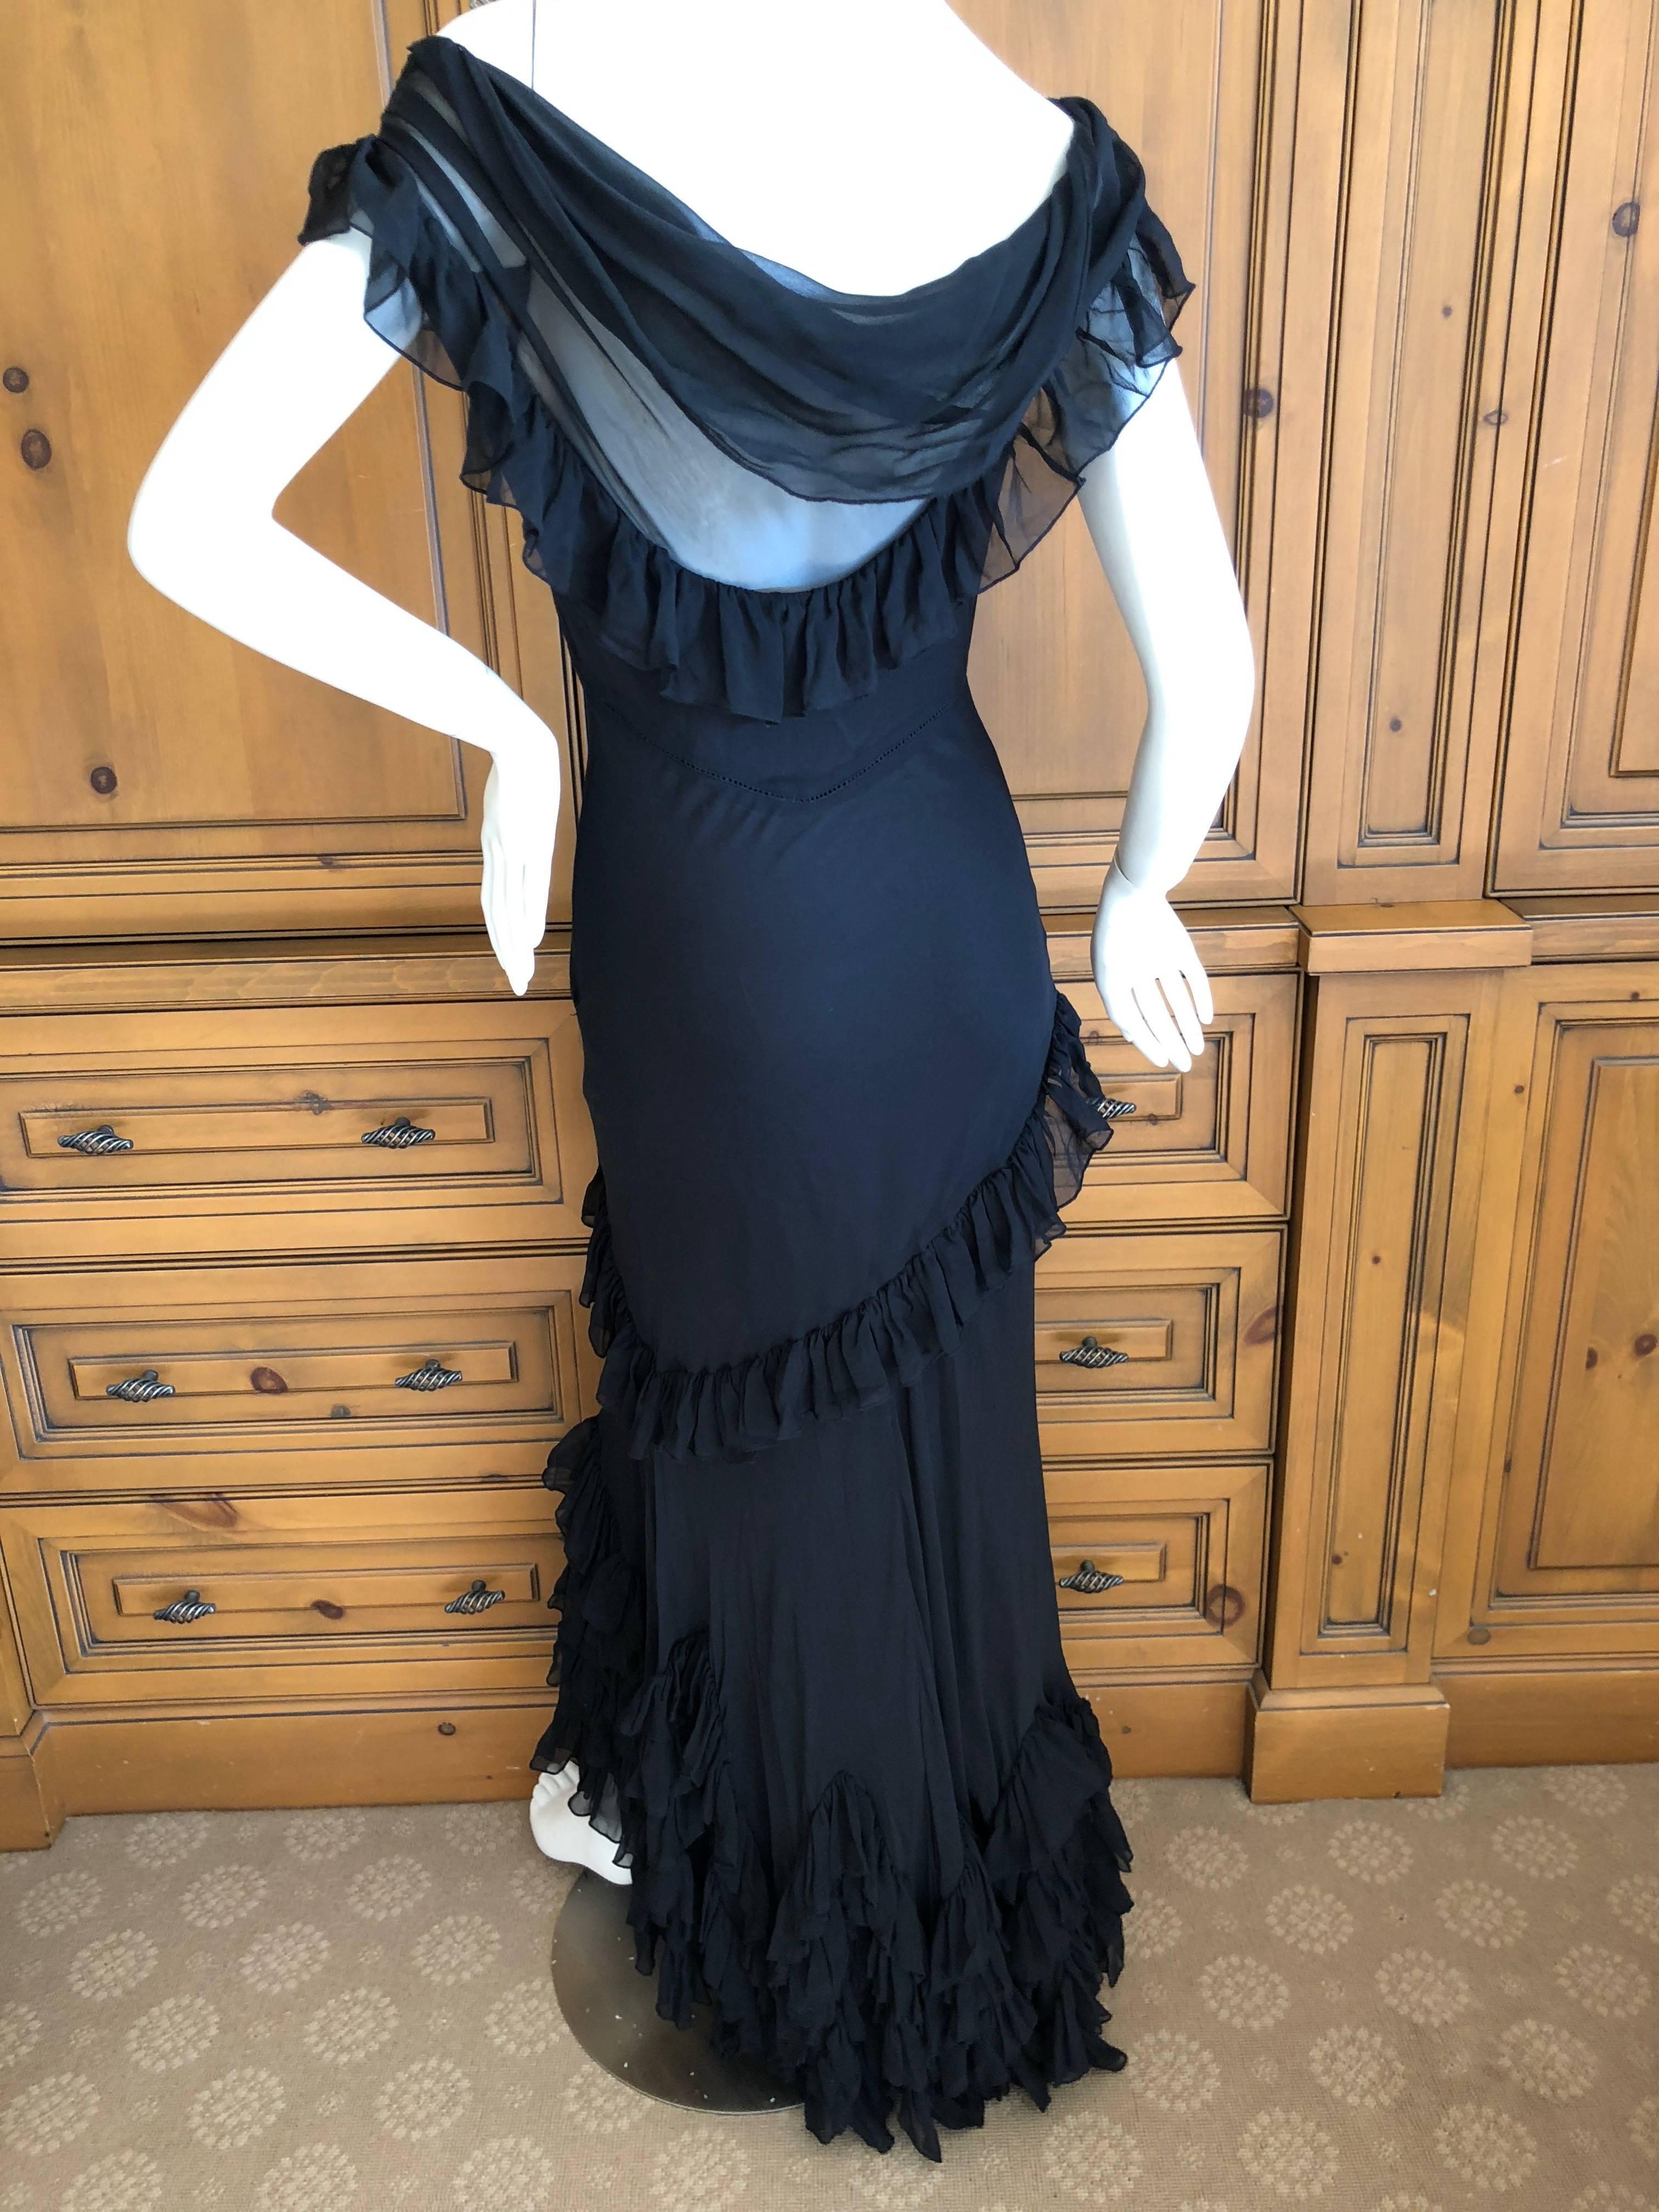  John Galliano Black Sheer Vintage Silk Ruffled Evening Dress with Cowl Back  In Excellent Condition For Sale In Cloverdale, CA